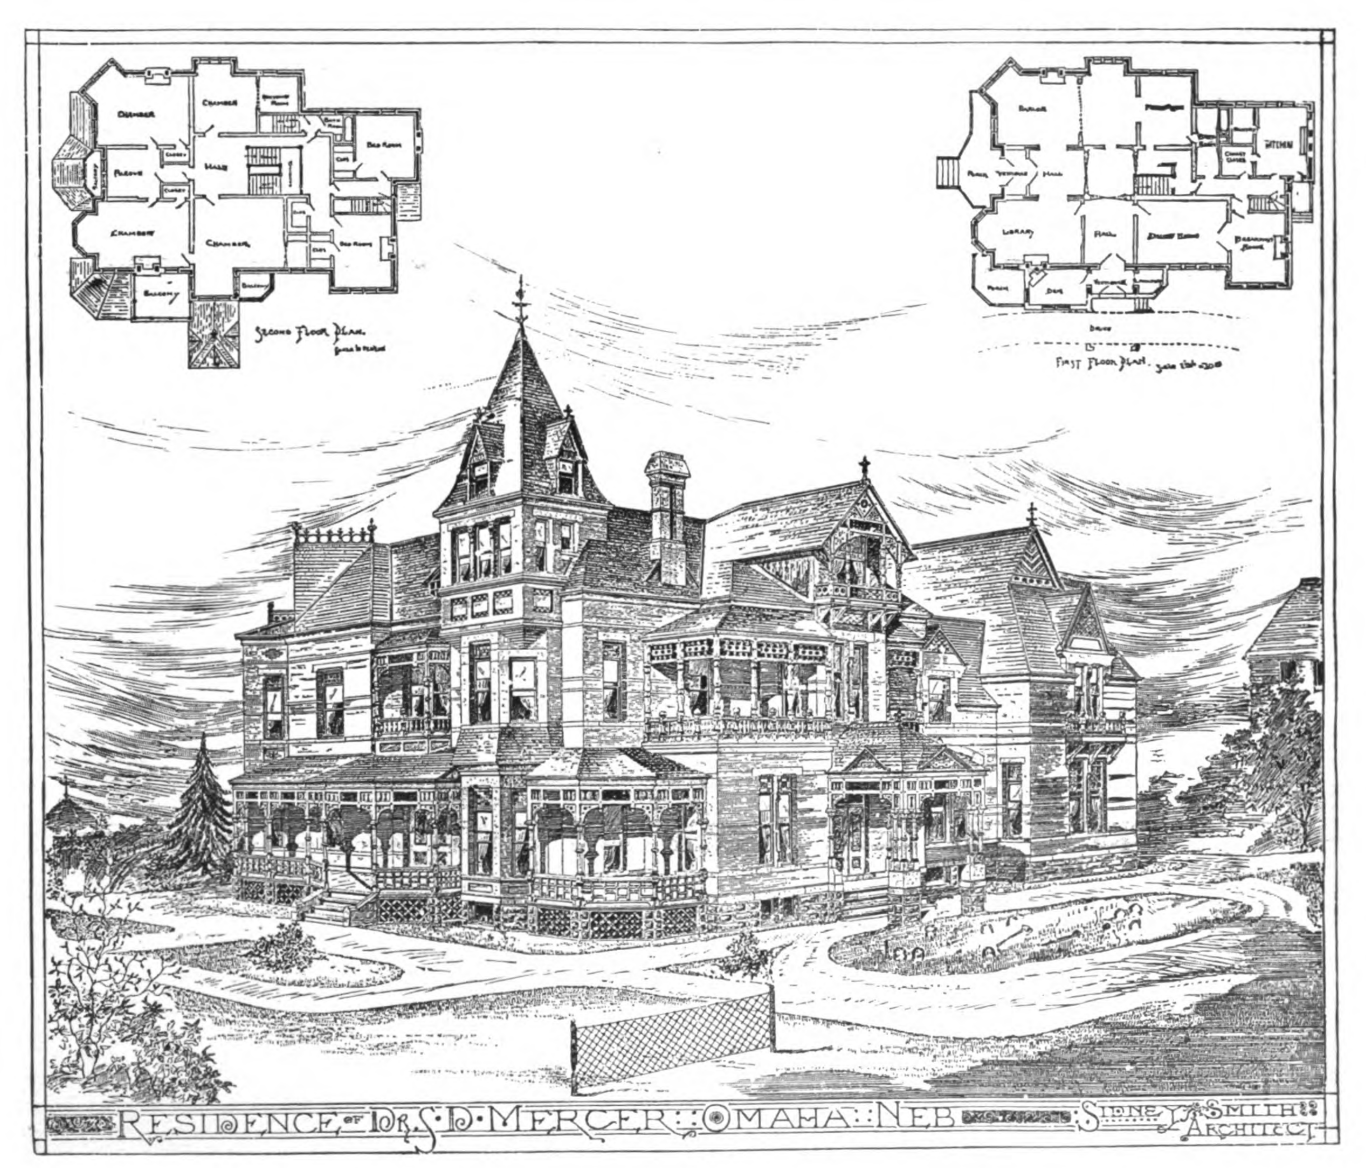 This is an 1885 architectural drawing of North Omaha's Mercer Mansion by Sidney Smith (1839-1915). Drawing shared courtesy of Quentin Lueninghoener.